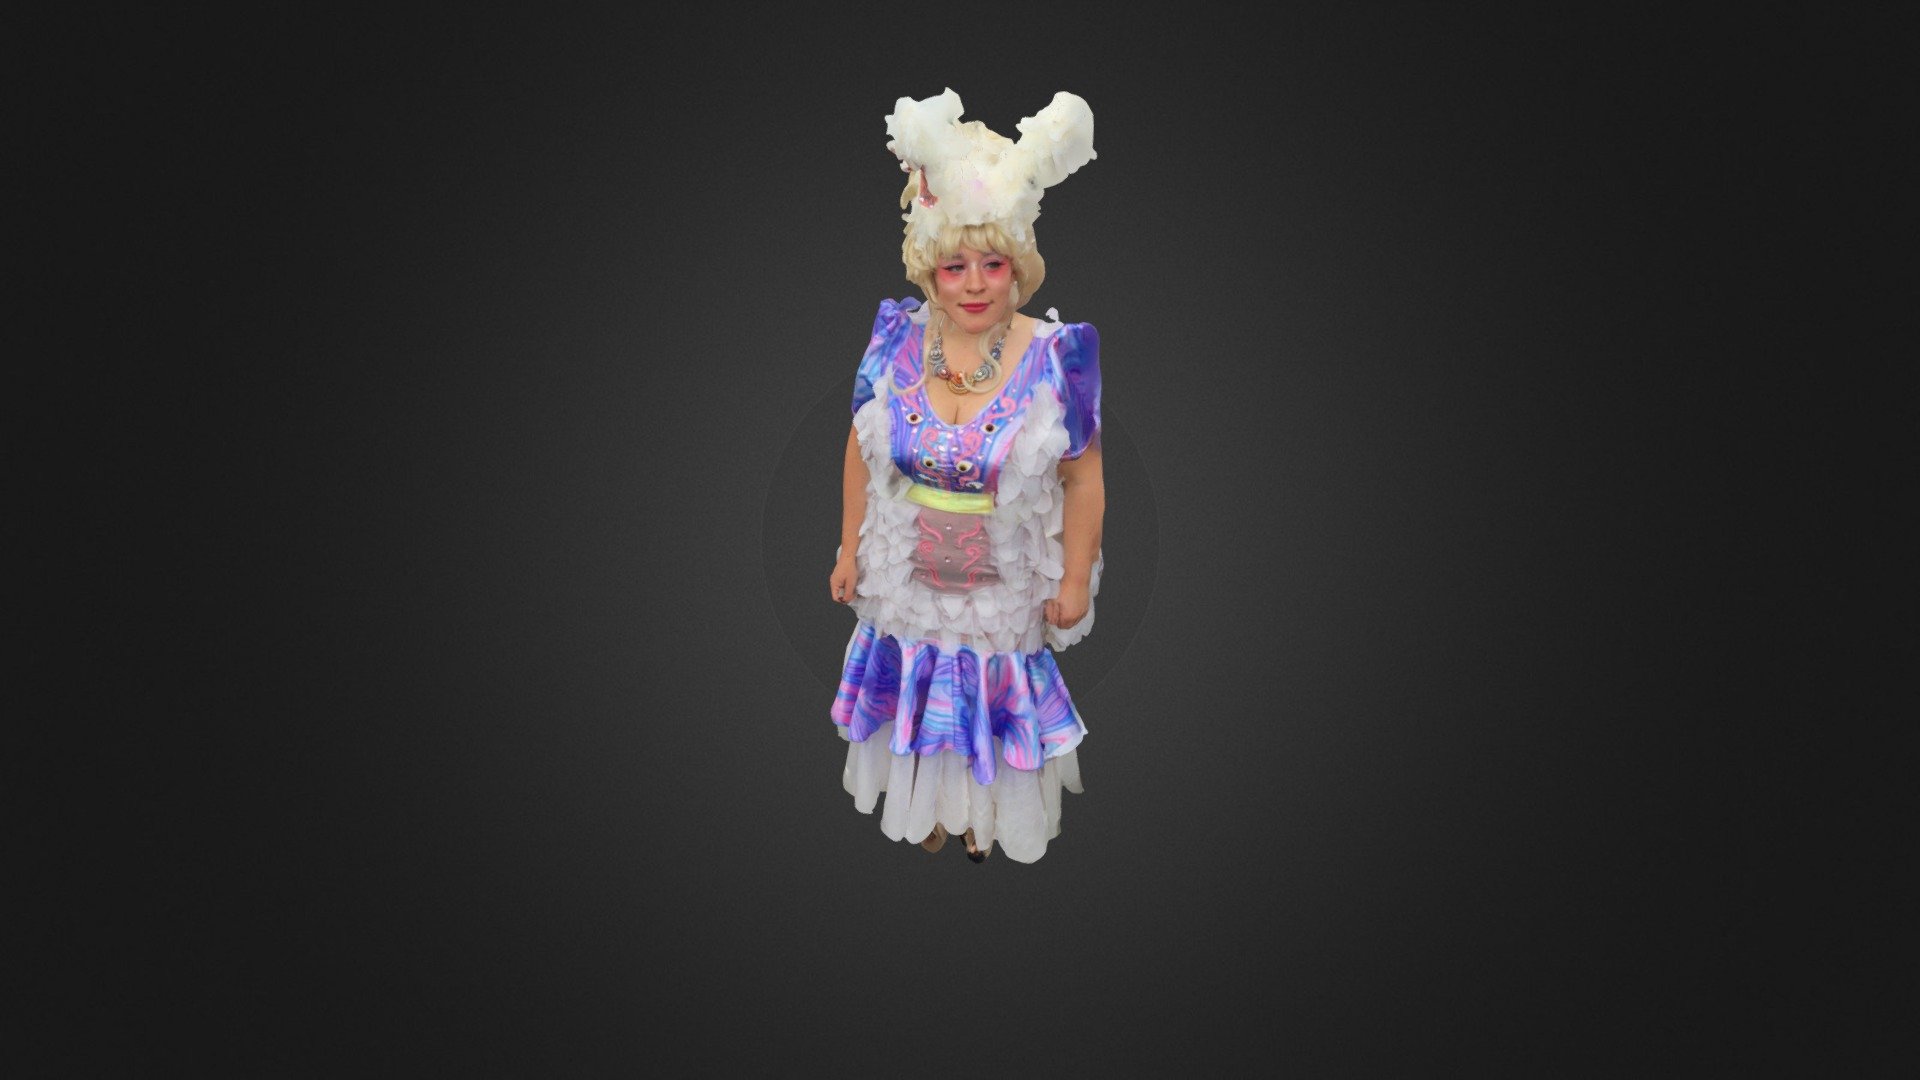 EASTER @ MONA! - cool costume - Emma Bugg - 3D model by TheDarkSunProject (@darksunproject) 3d model